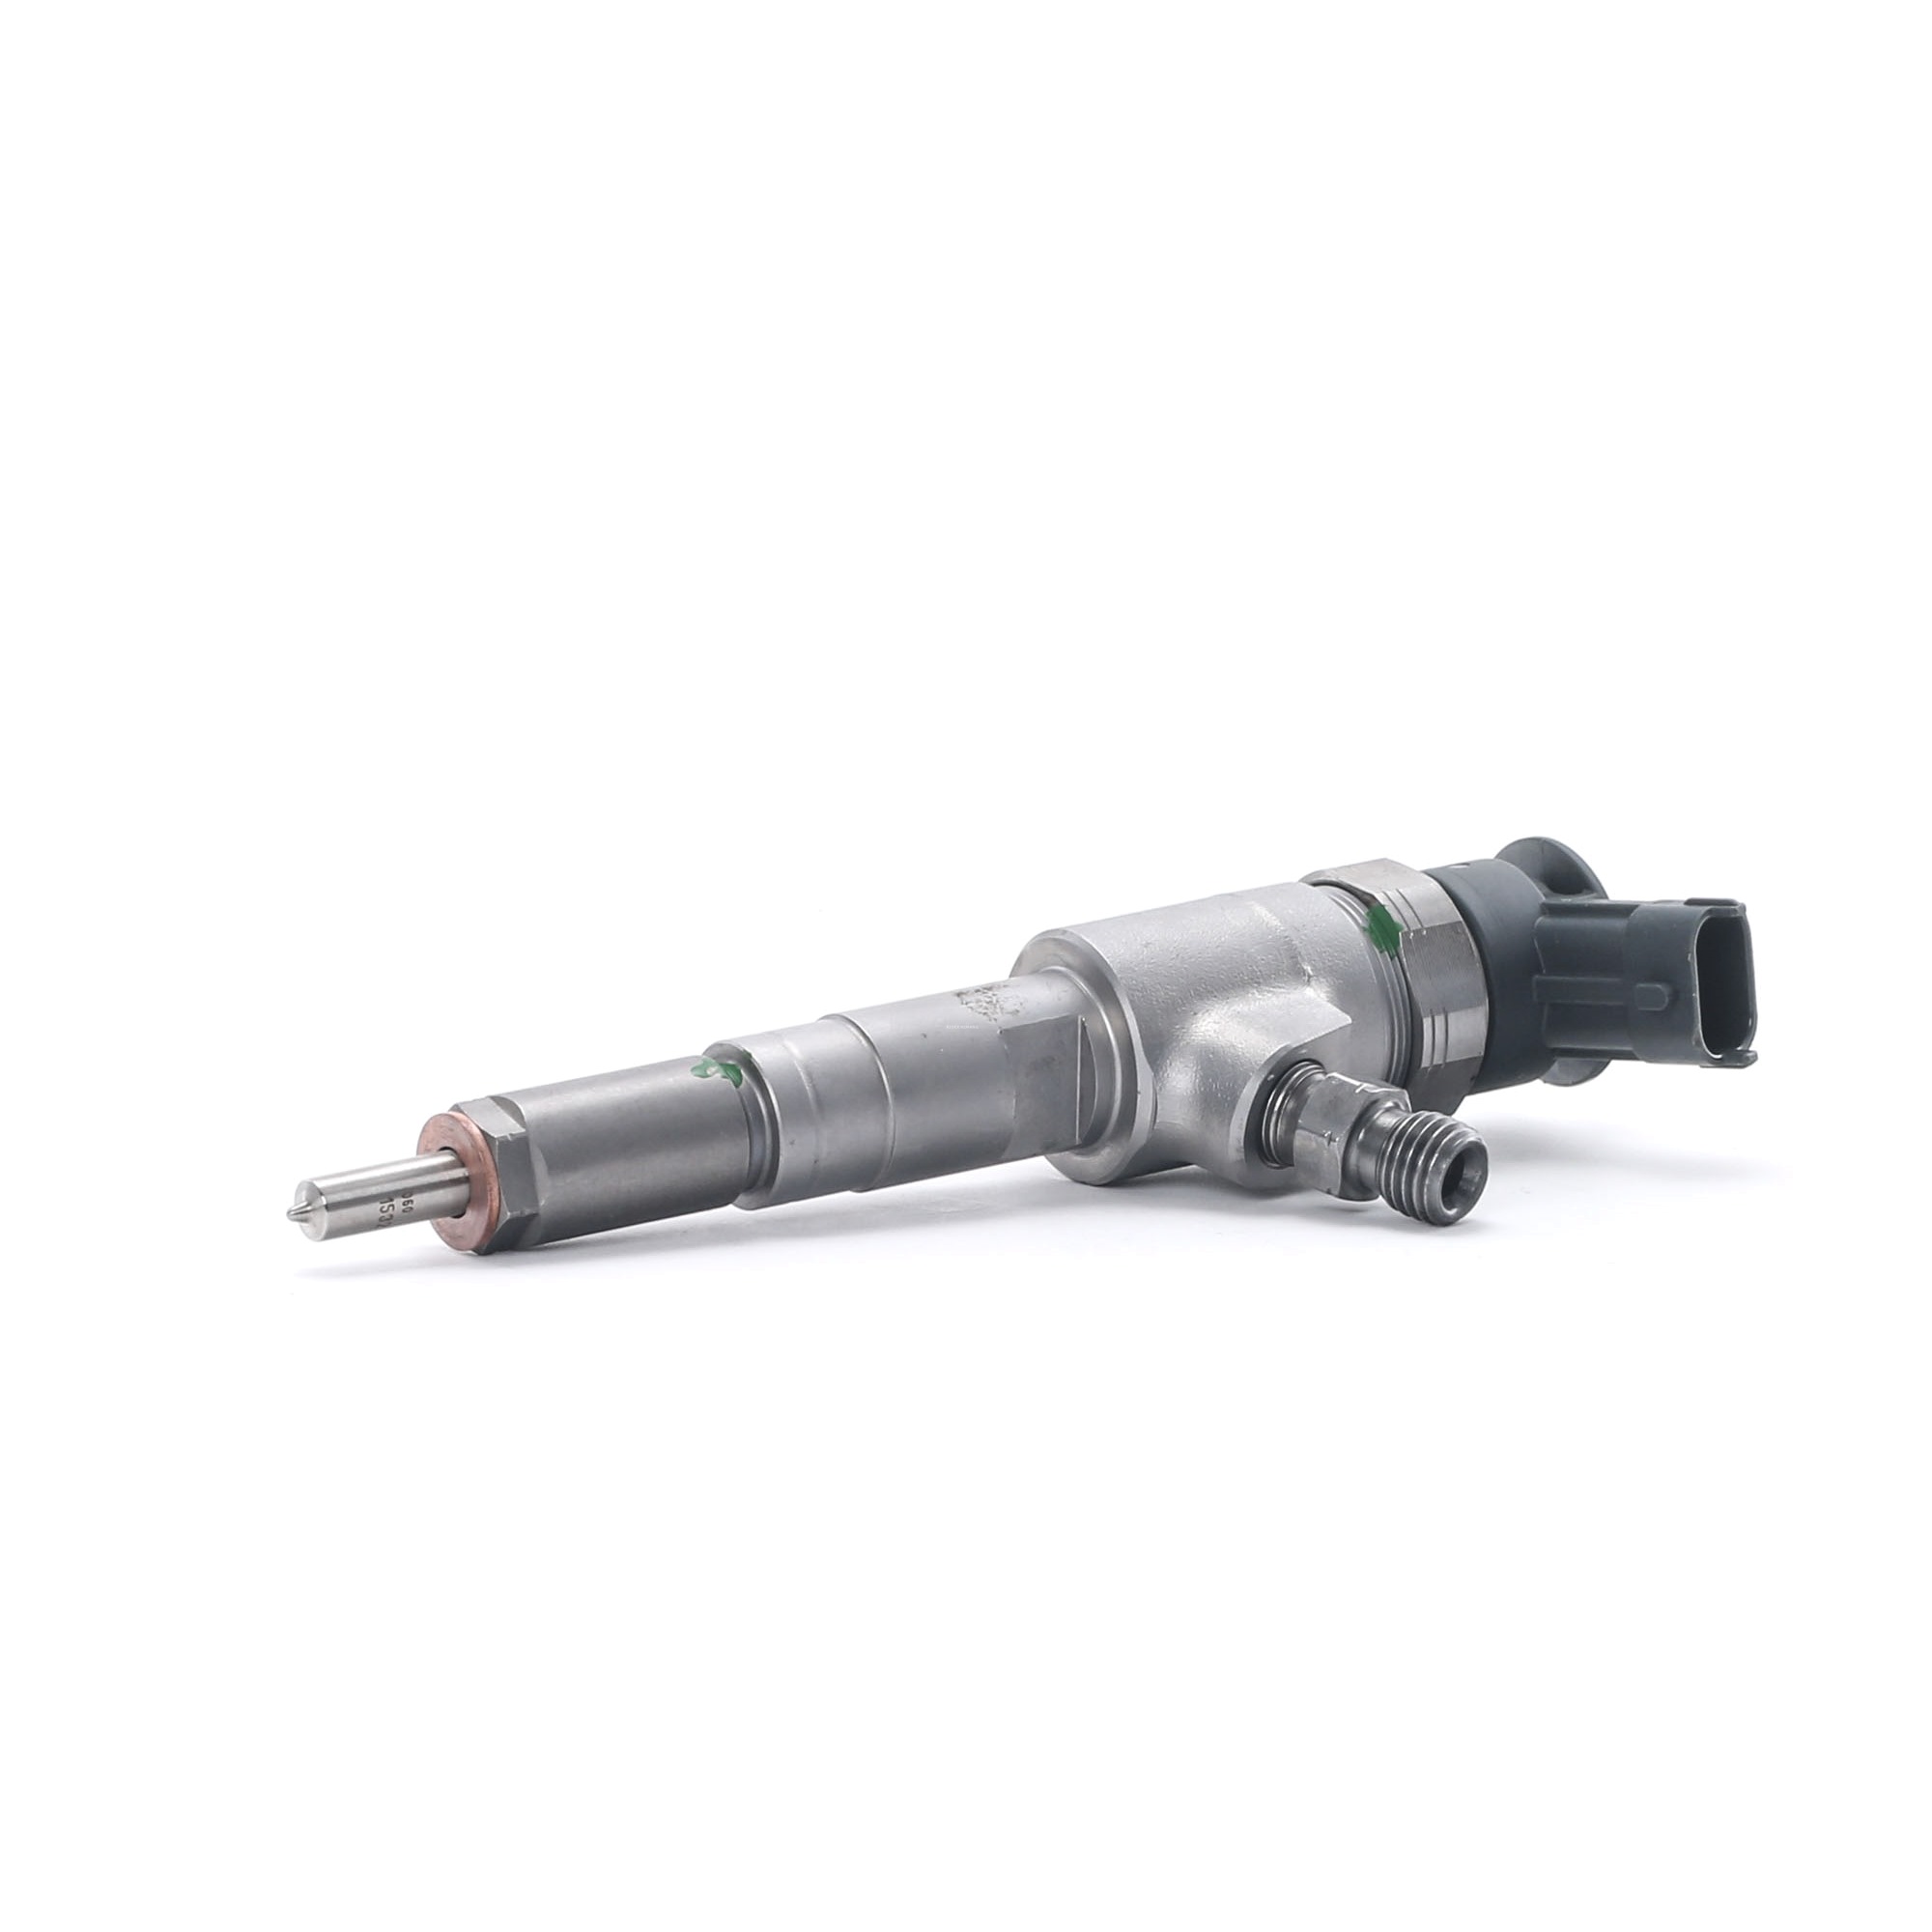 RIDEX REMAN 3902I0284R Injector Nozzle Diesel, Common Rail (CR), with seal ring